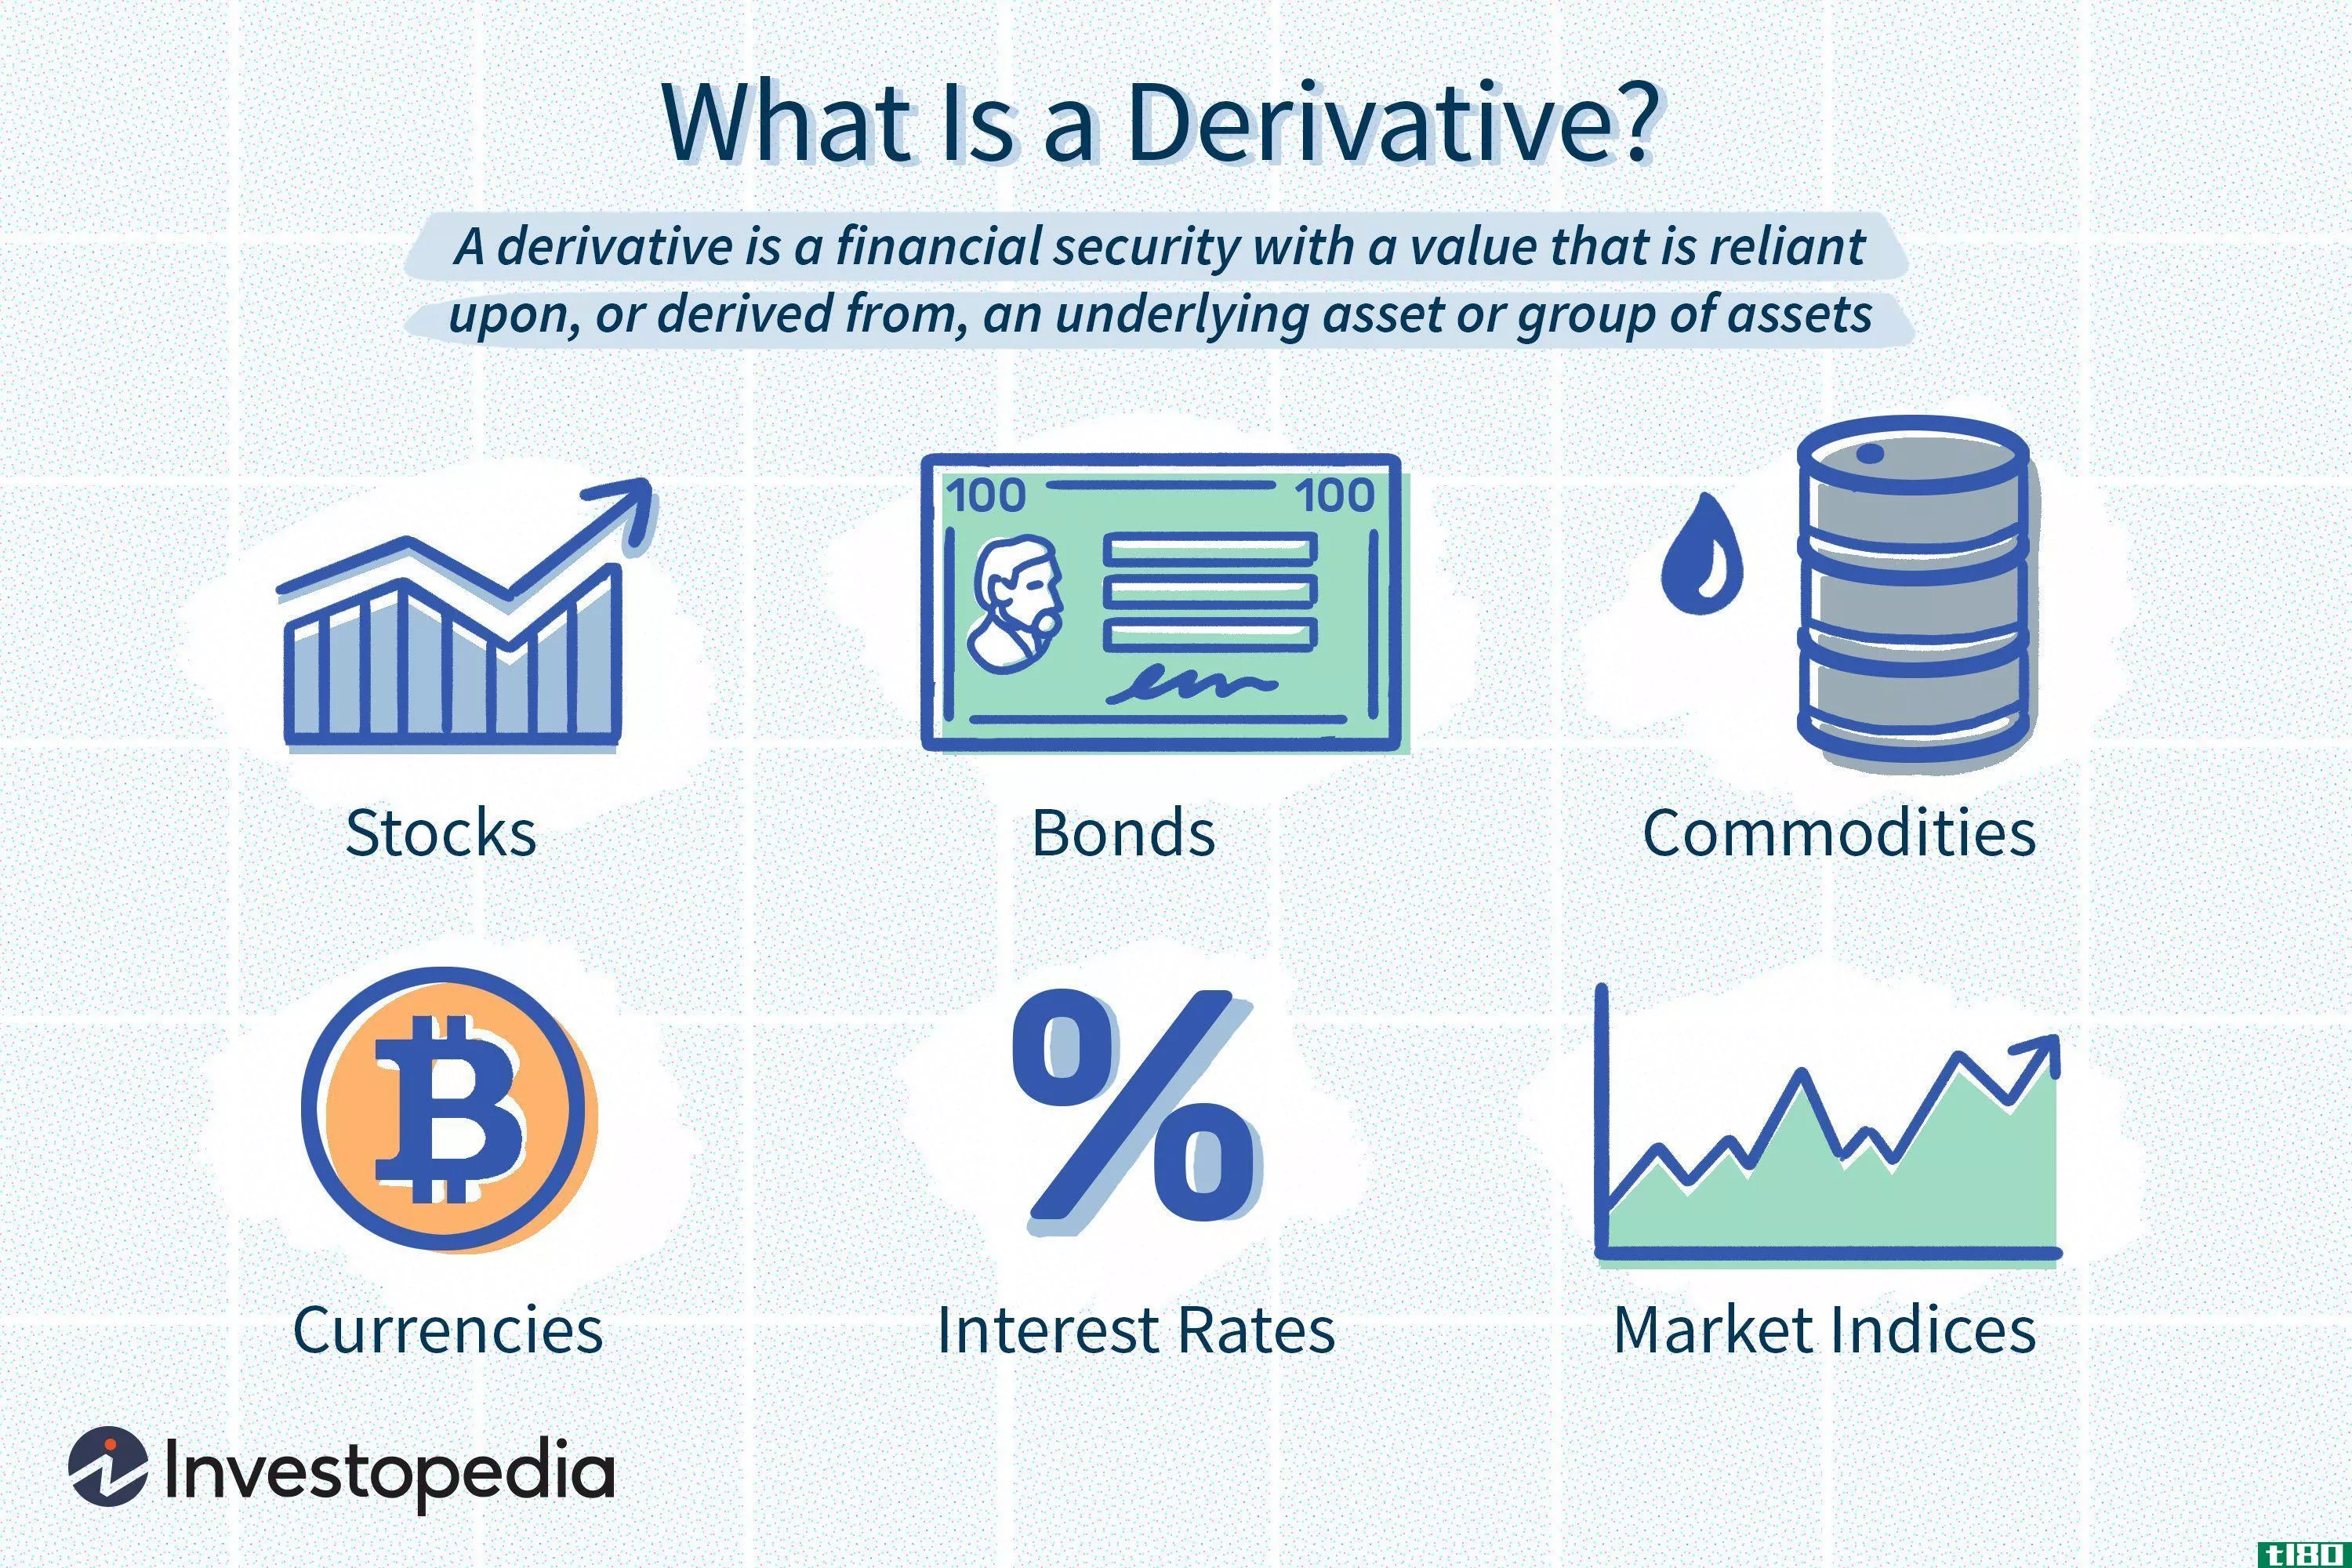 What is a Derivative?